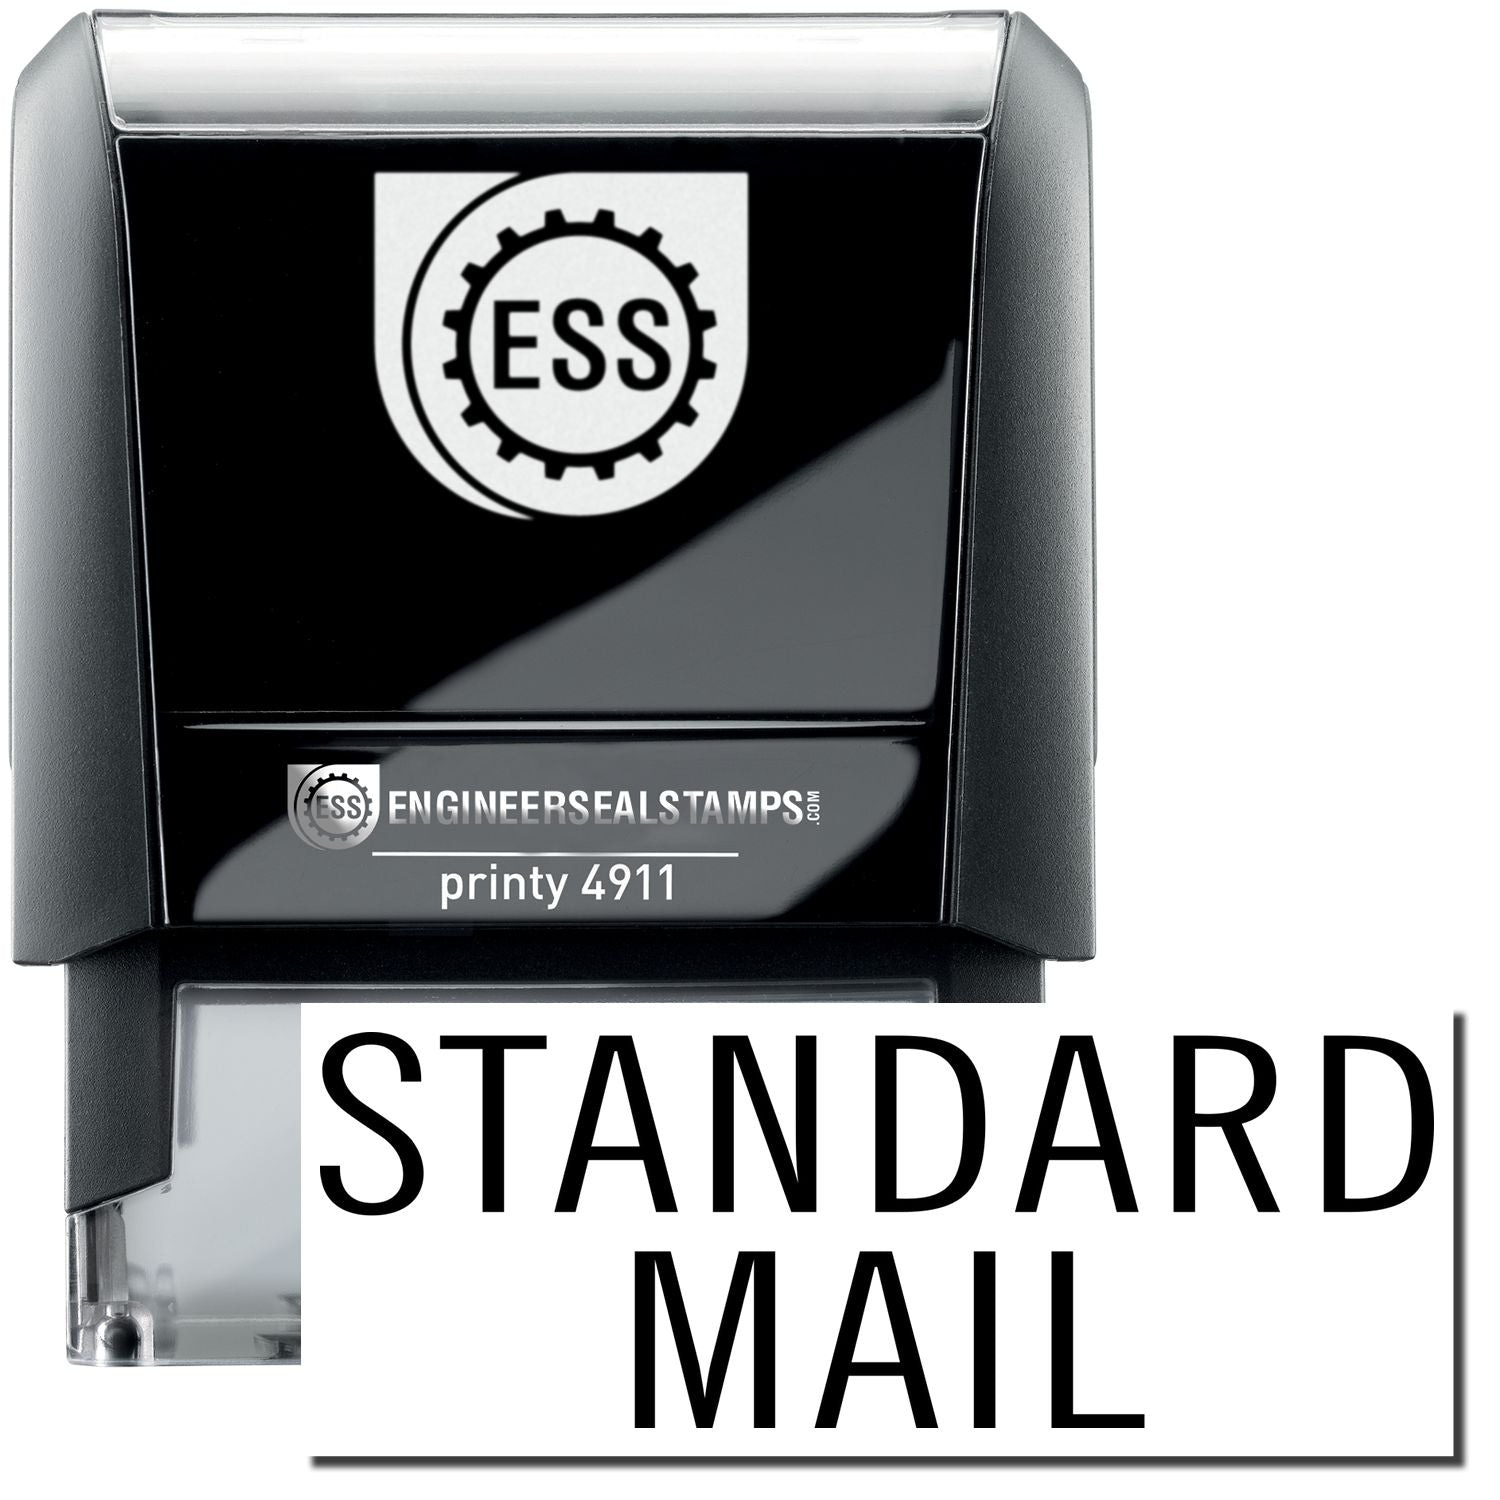 A self-inking stamp with a stamped image showing how the text "STANDARD MAIL" in a stacked concept (takes up two lines) is displayed after stamping.